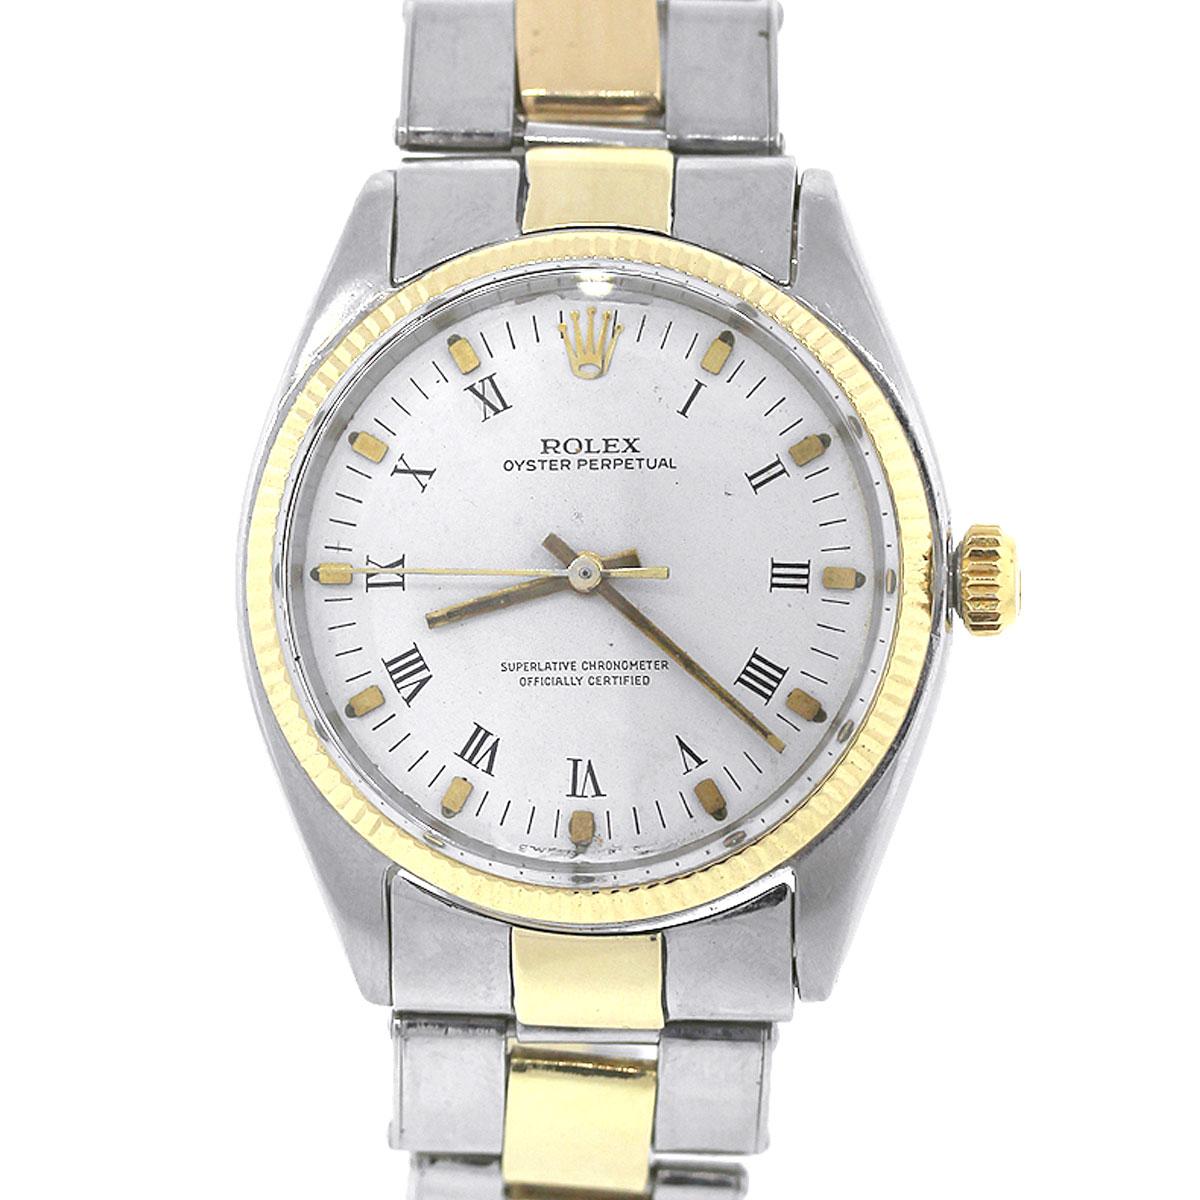 Rolex Stainless Steel Oyster Perpetual White Dial Automatic Wristwatch Ref 1005 